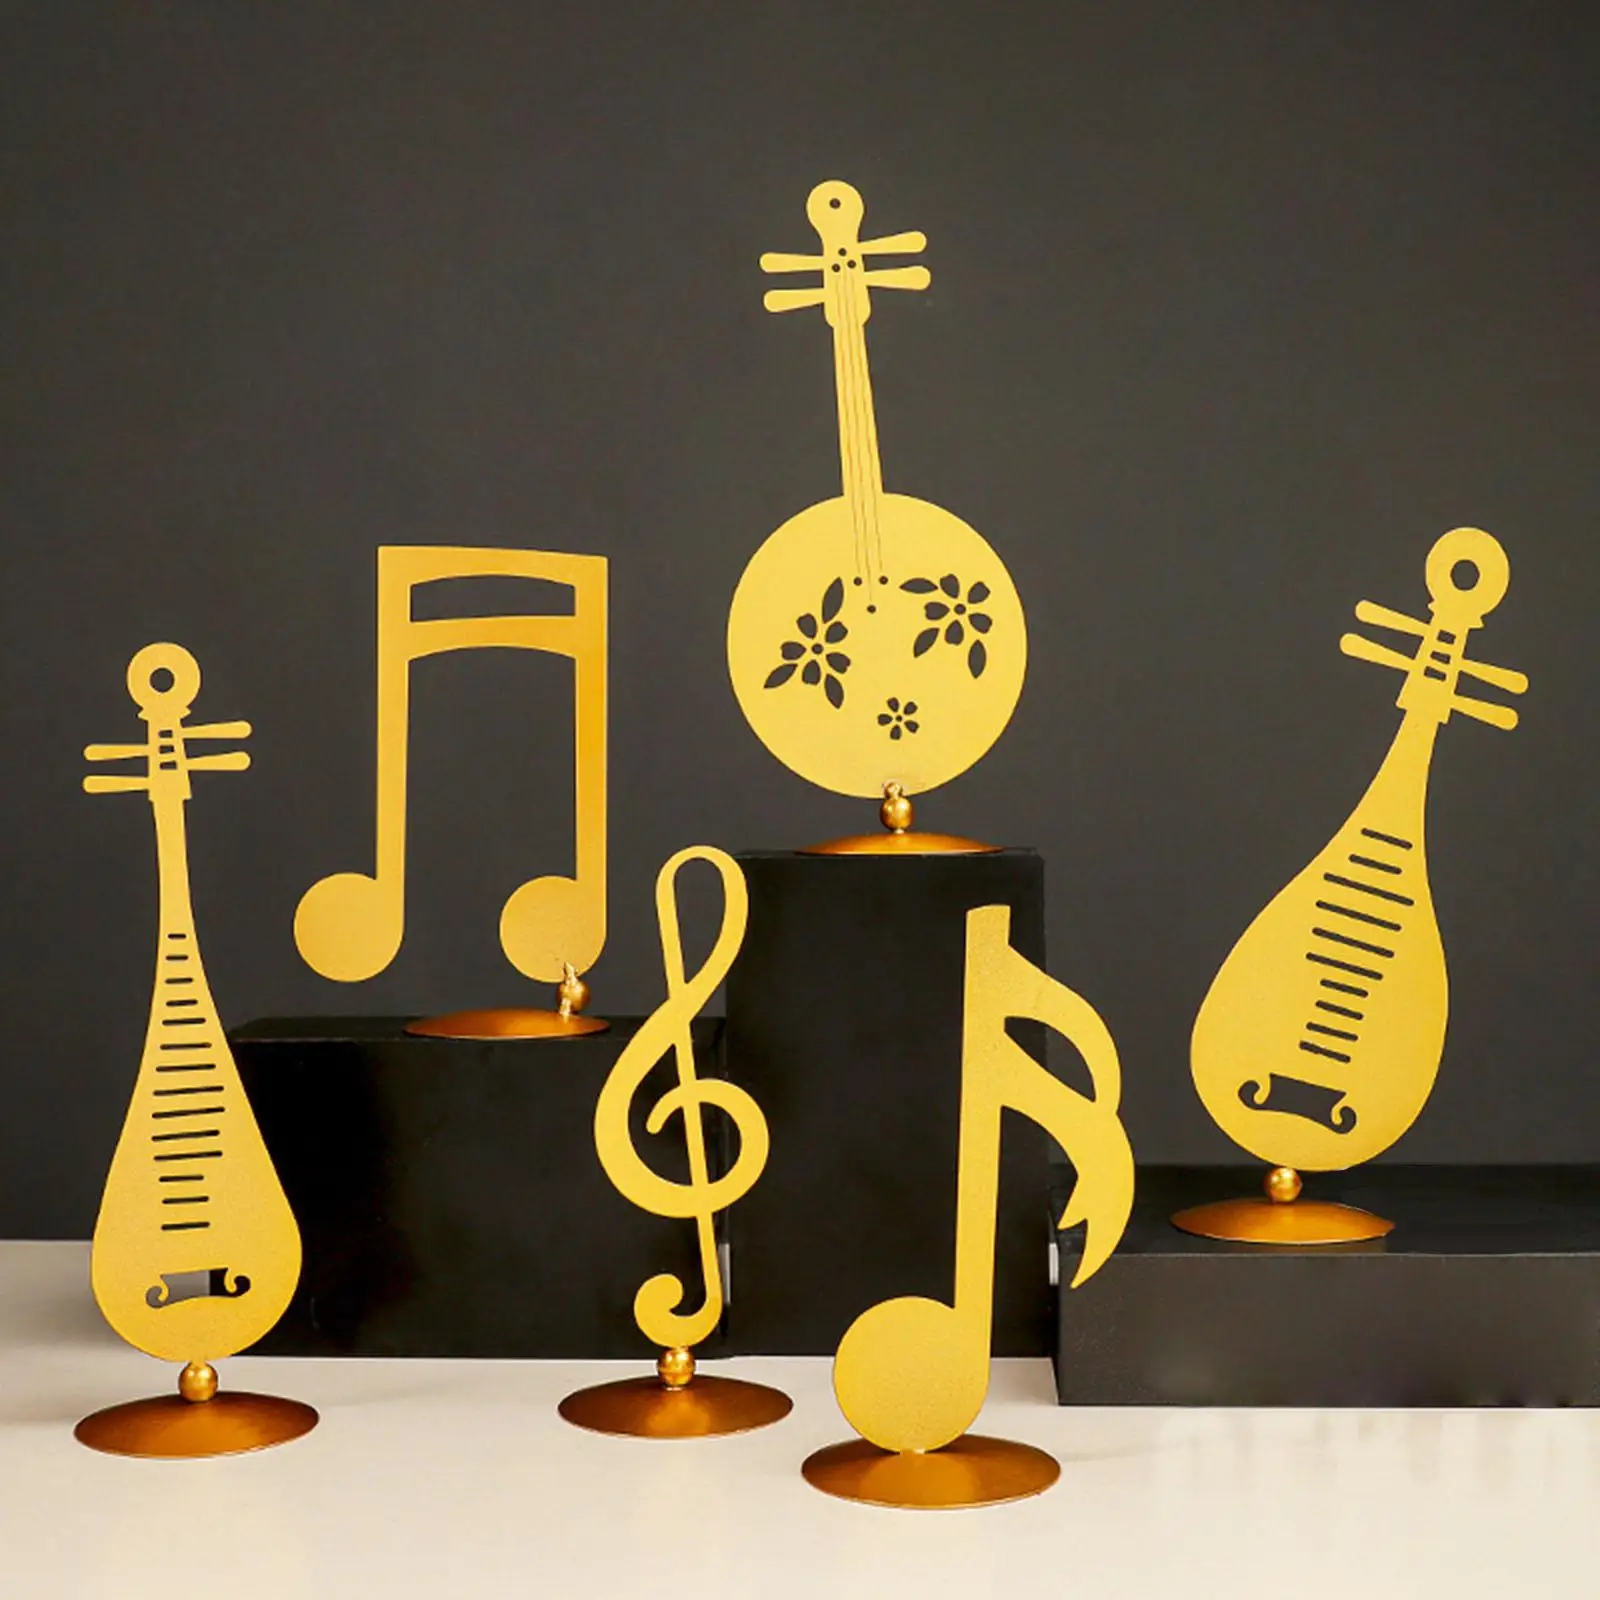 Golden Musical Note Statue Crafts Sculpture Figurine Tabletop Music Note Ornament for Home Cabinet Bedroom Decor Gifts Souvenirs